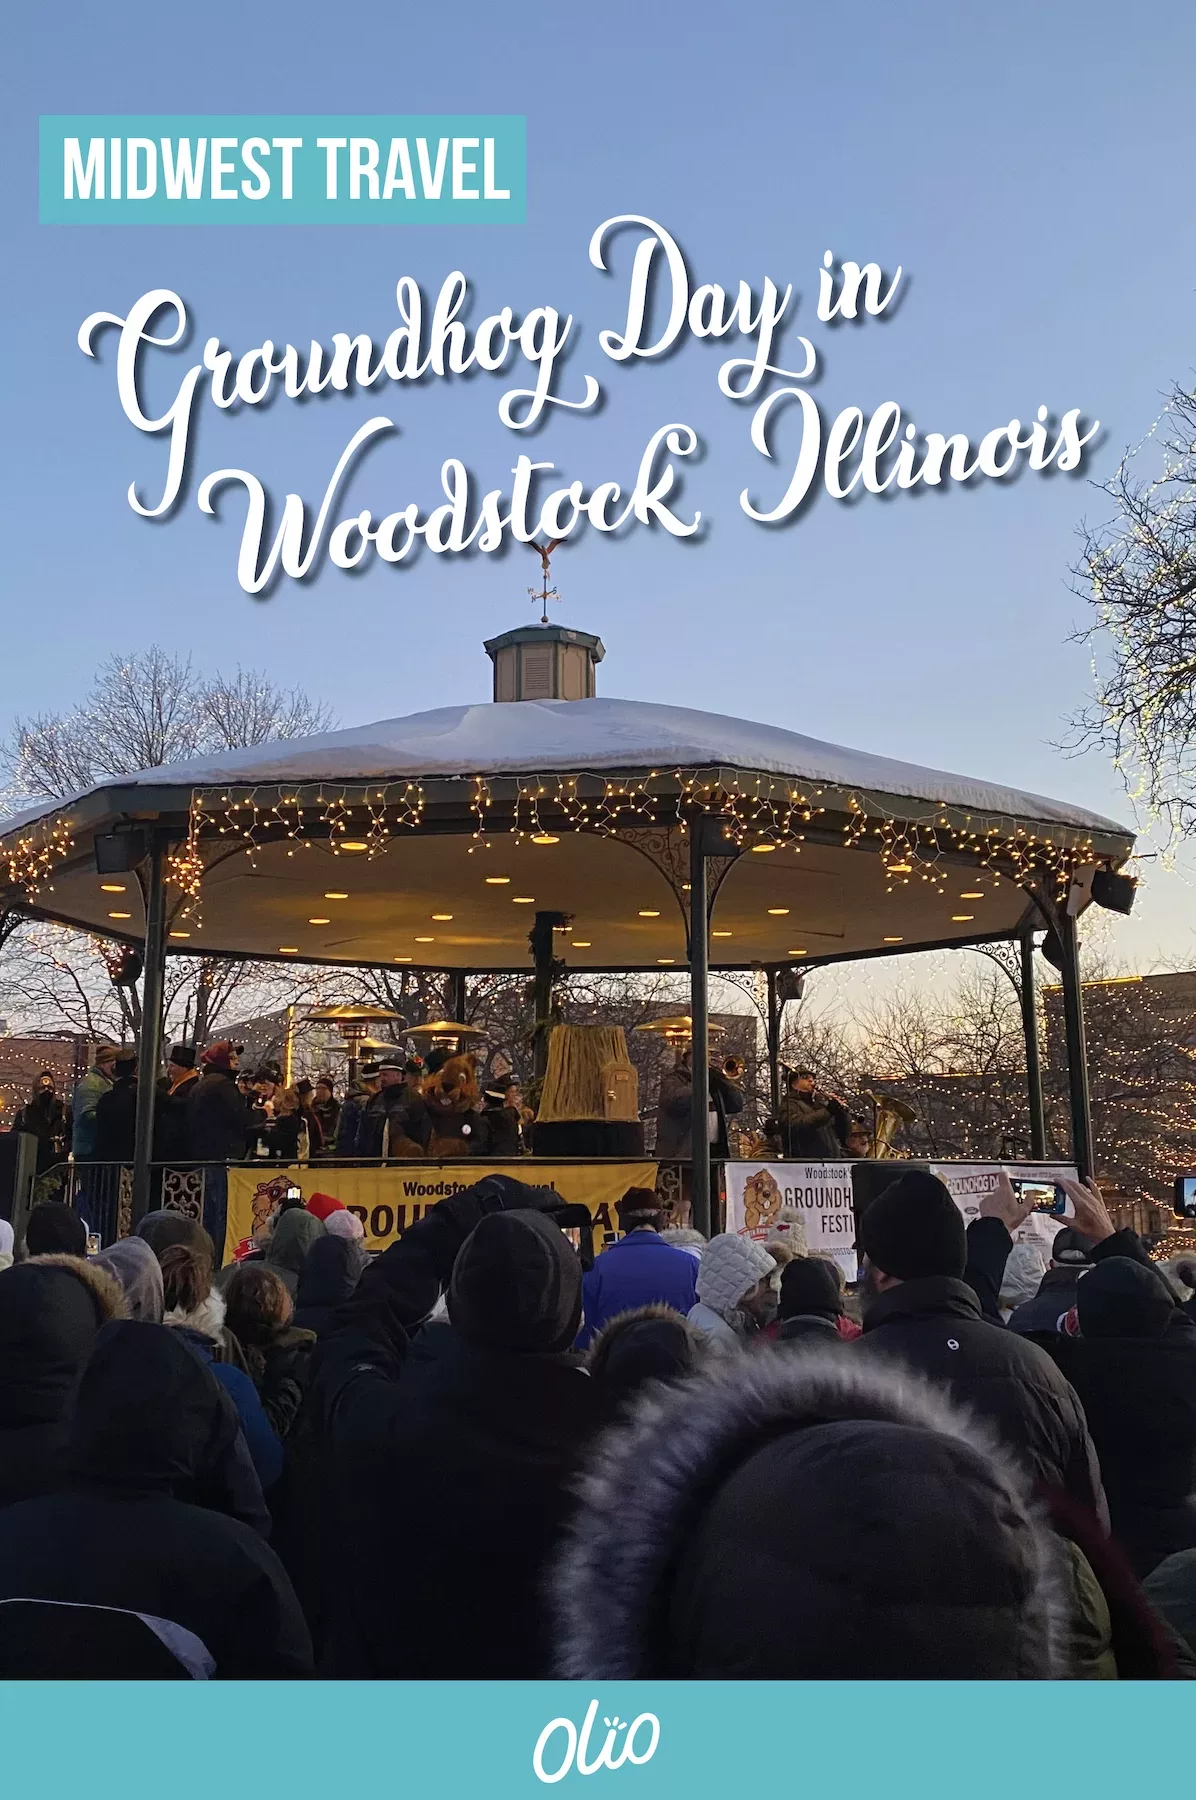 What if every day was just like the one before? Step into the 1993 classic film Groundhog Day with a visit to Woodstock, Illinois where the movie was filmed. While you can see the sites year round, this northern Illinois town fully embraces its Hollywood history come February 2. Here’s everything you need to know about spending Groundhog Day in Woodstock, Illinois, where the movie Groundhog Day was filmed.